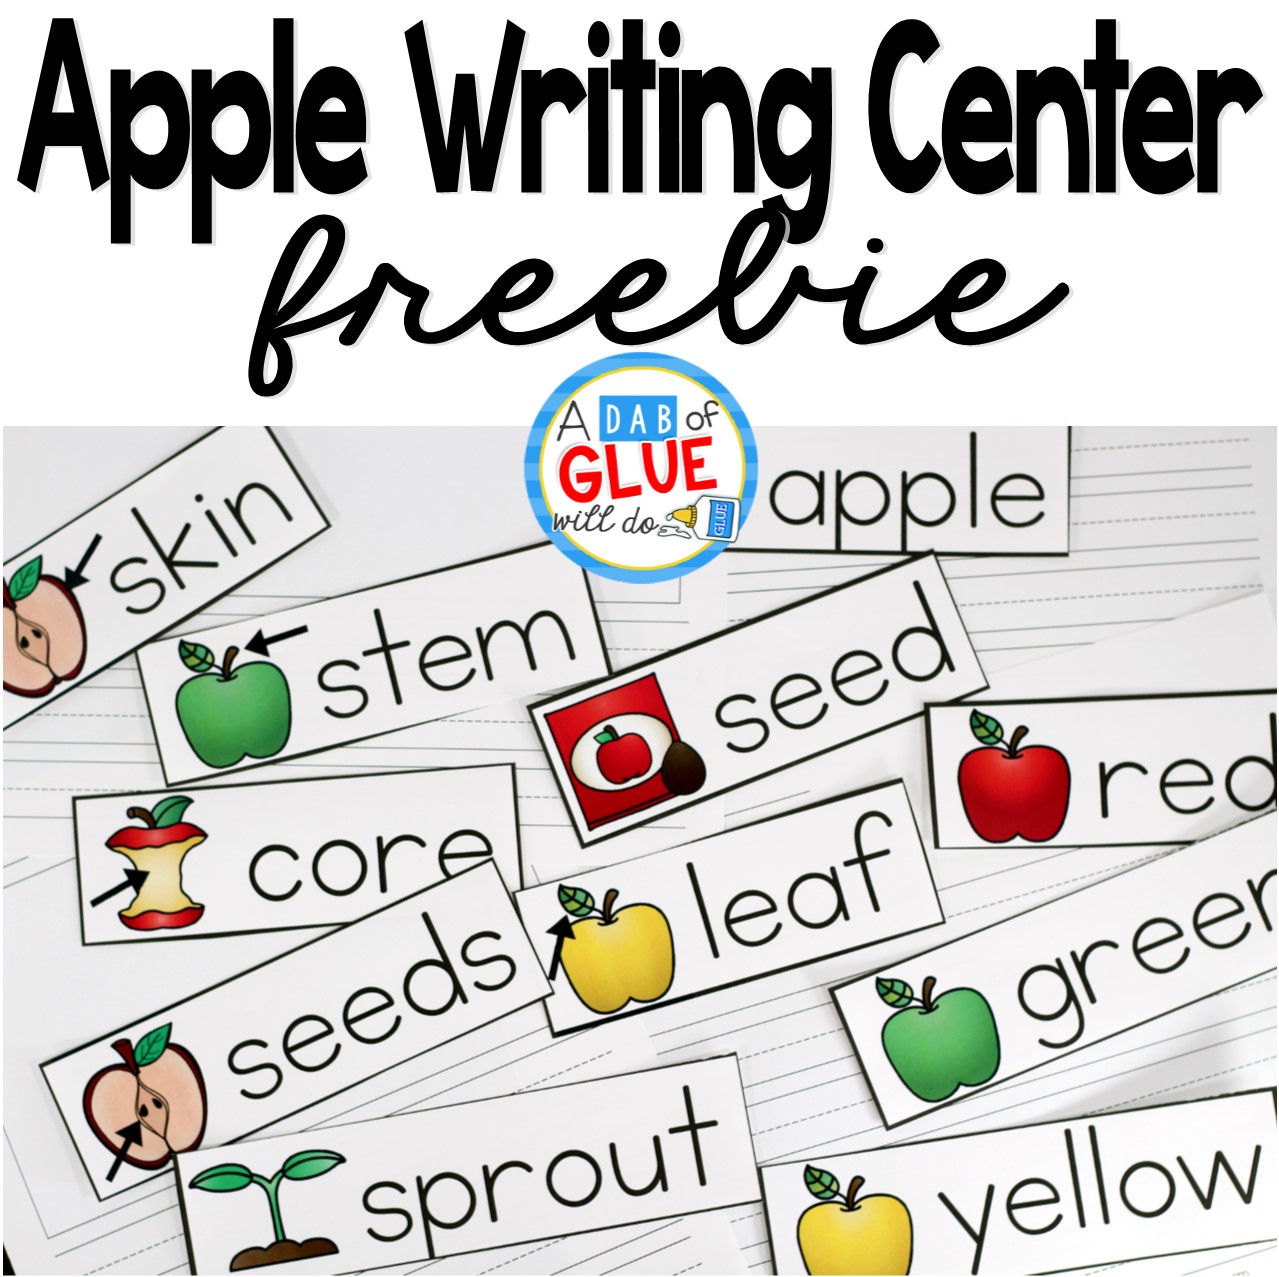 Apple Writing Center has everything that you need to include into your literacy rotations when learning about apples.